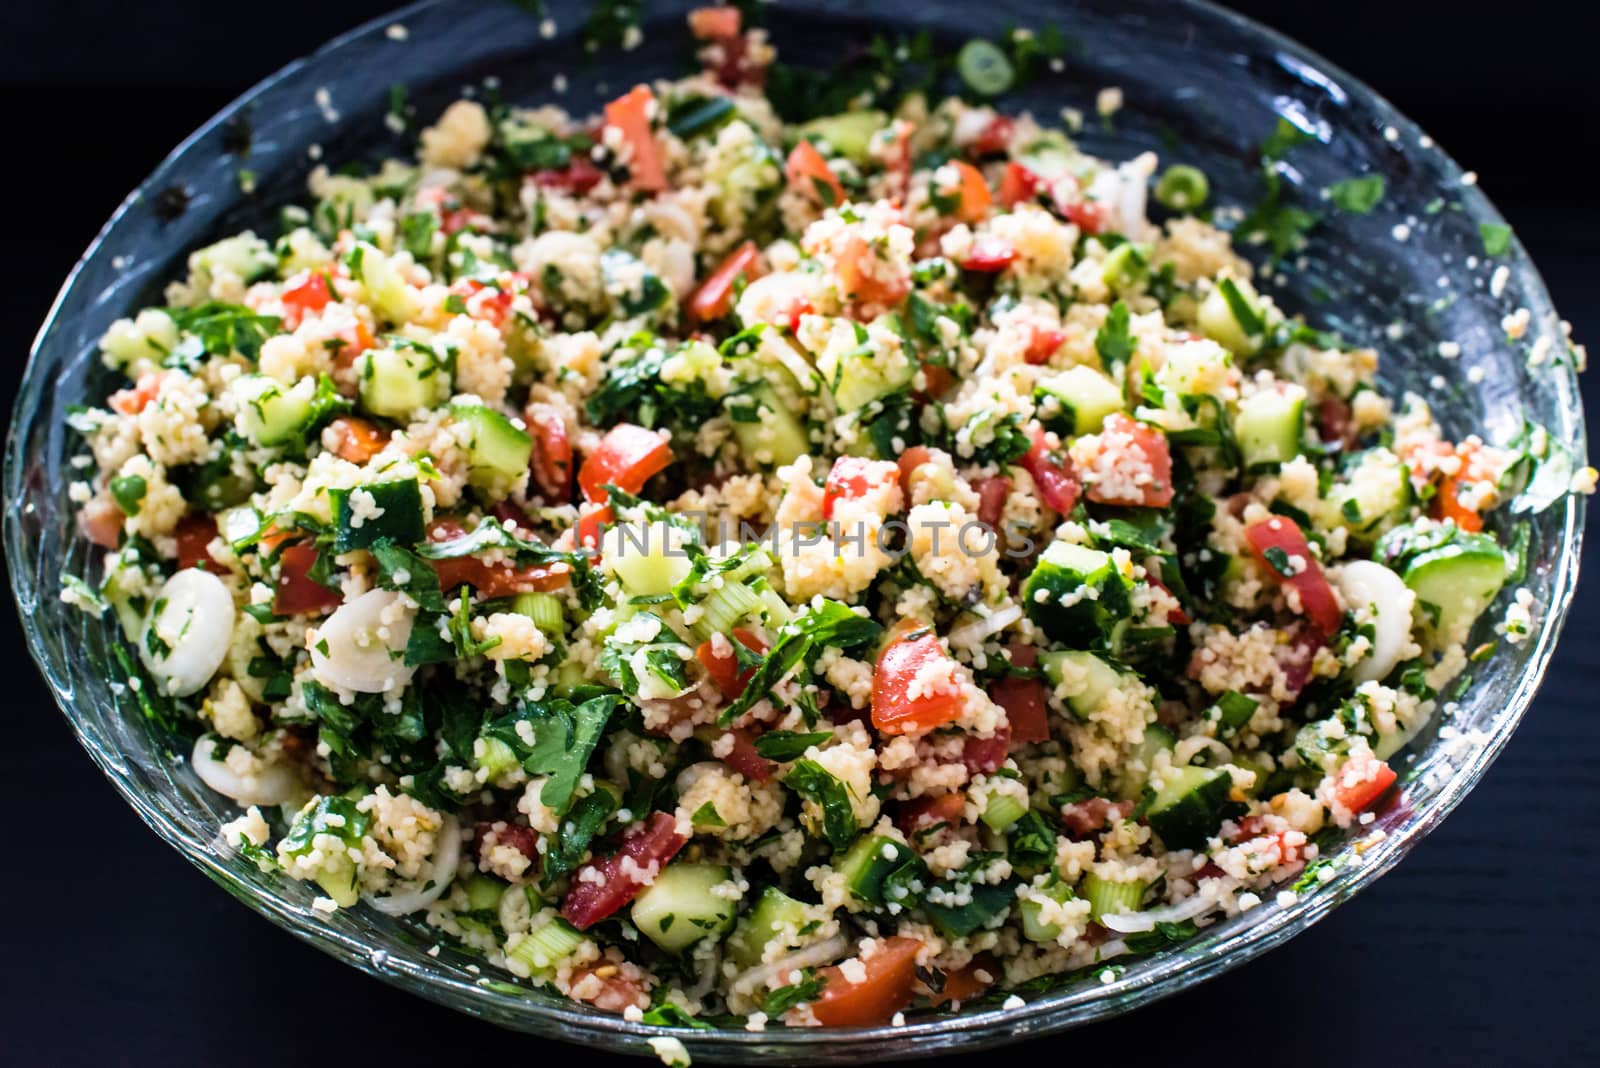 delicious and healthy tabbouleh made of couscous and various vegetables in a huge salad bowl